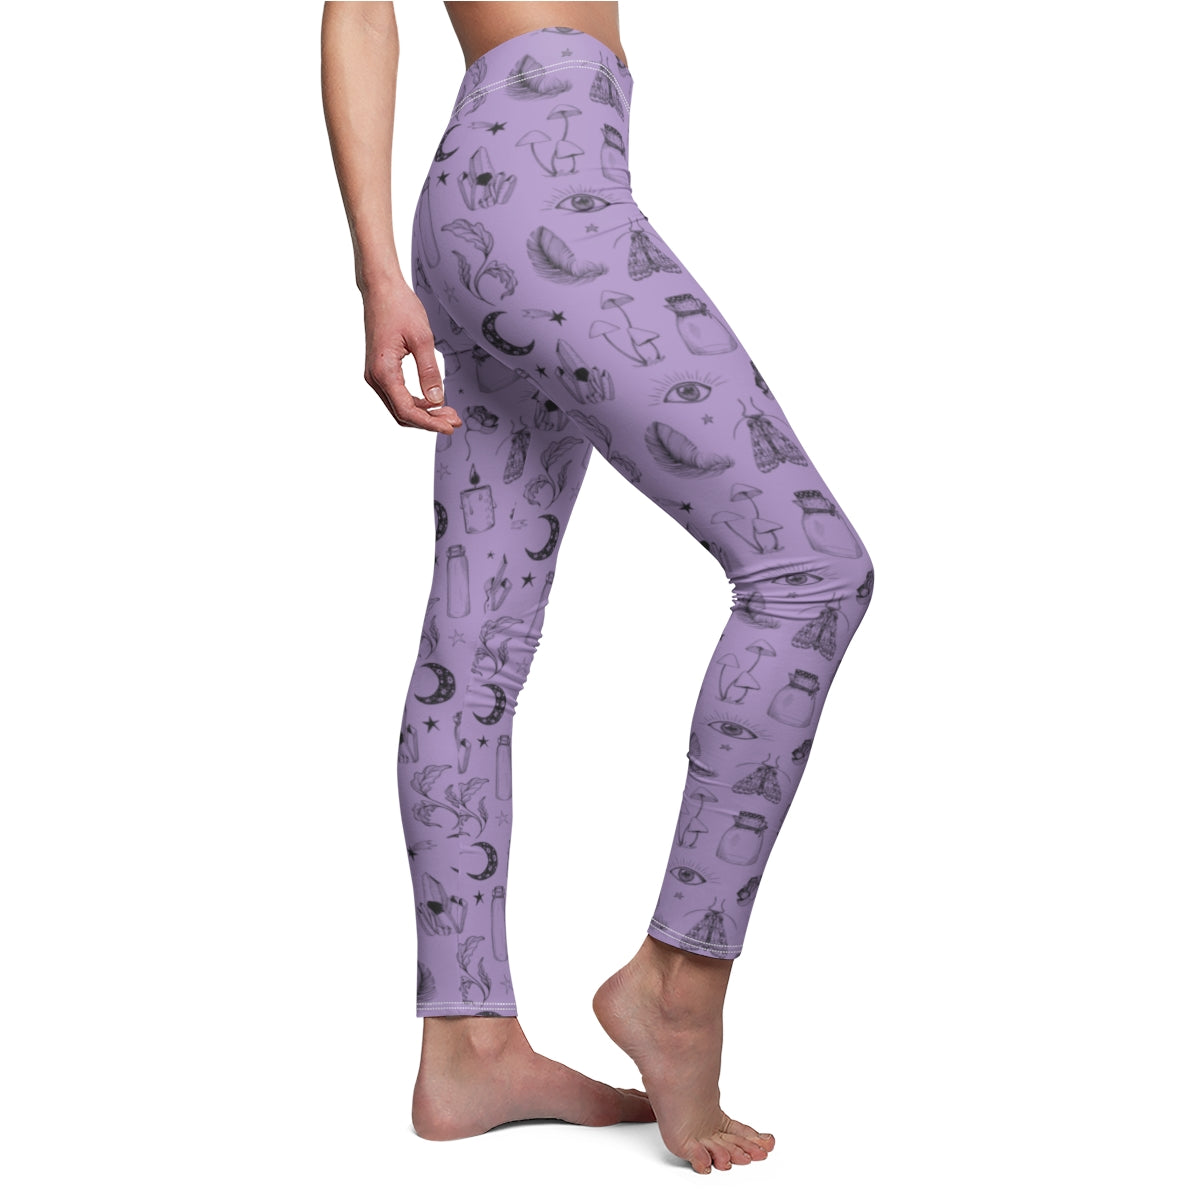 Witchy Aesthetic Pastel Goth Leggings